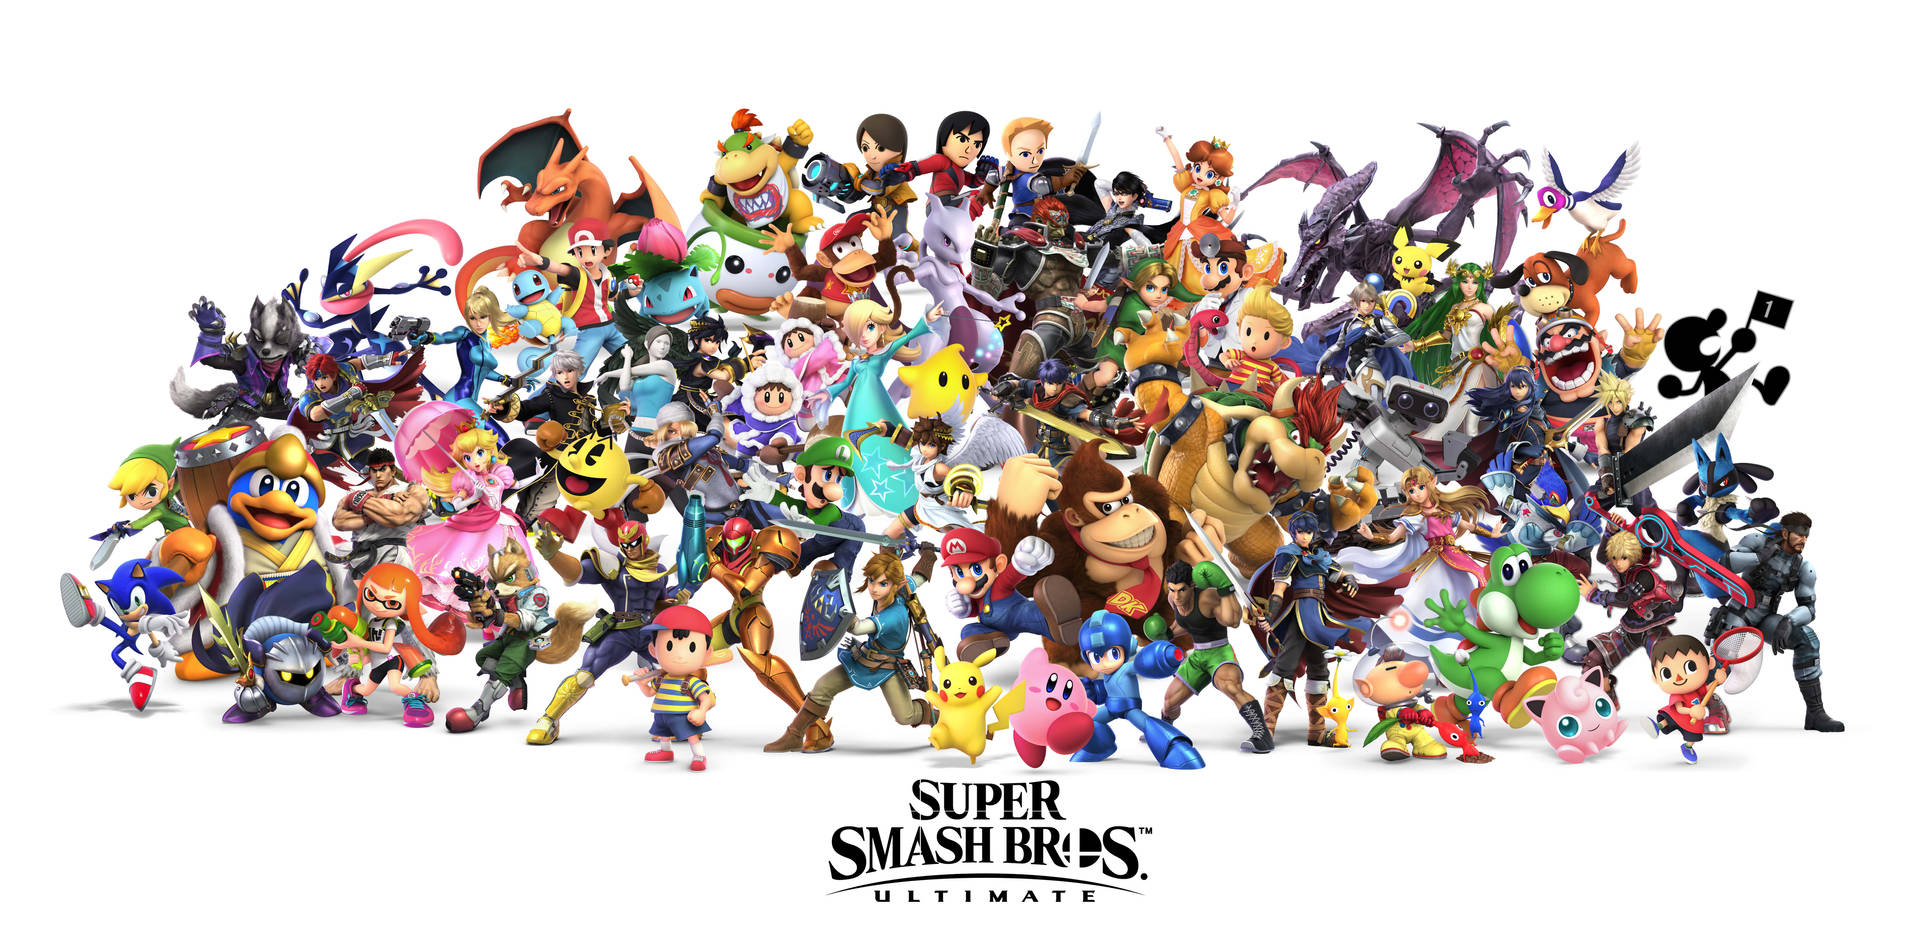 Super Smash Bros Ultimate 9272X4587 Wallpaper and Background Image